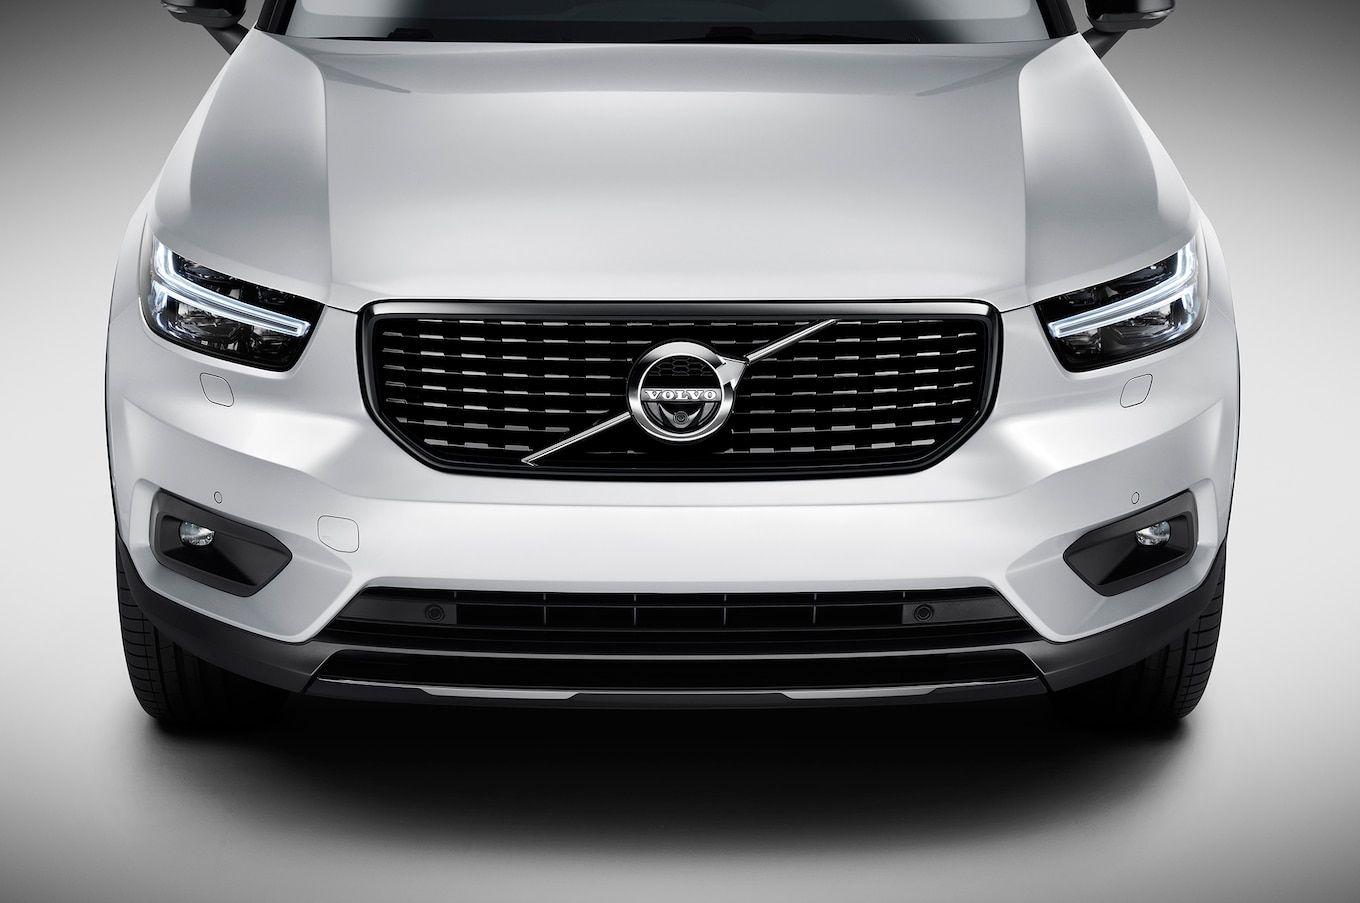 2018 Volvo Grill Logo - 2018 Volvo XC40 front grille - Motortrend